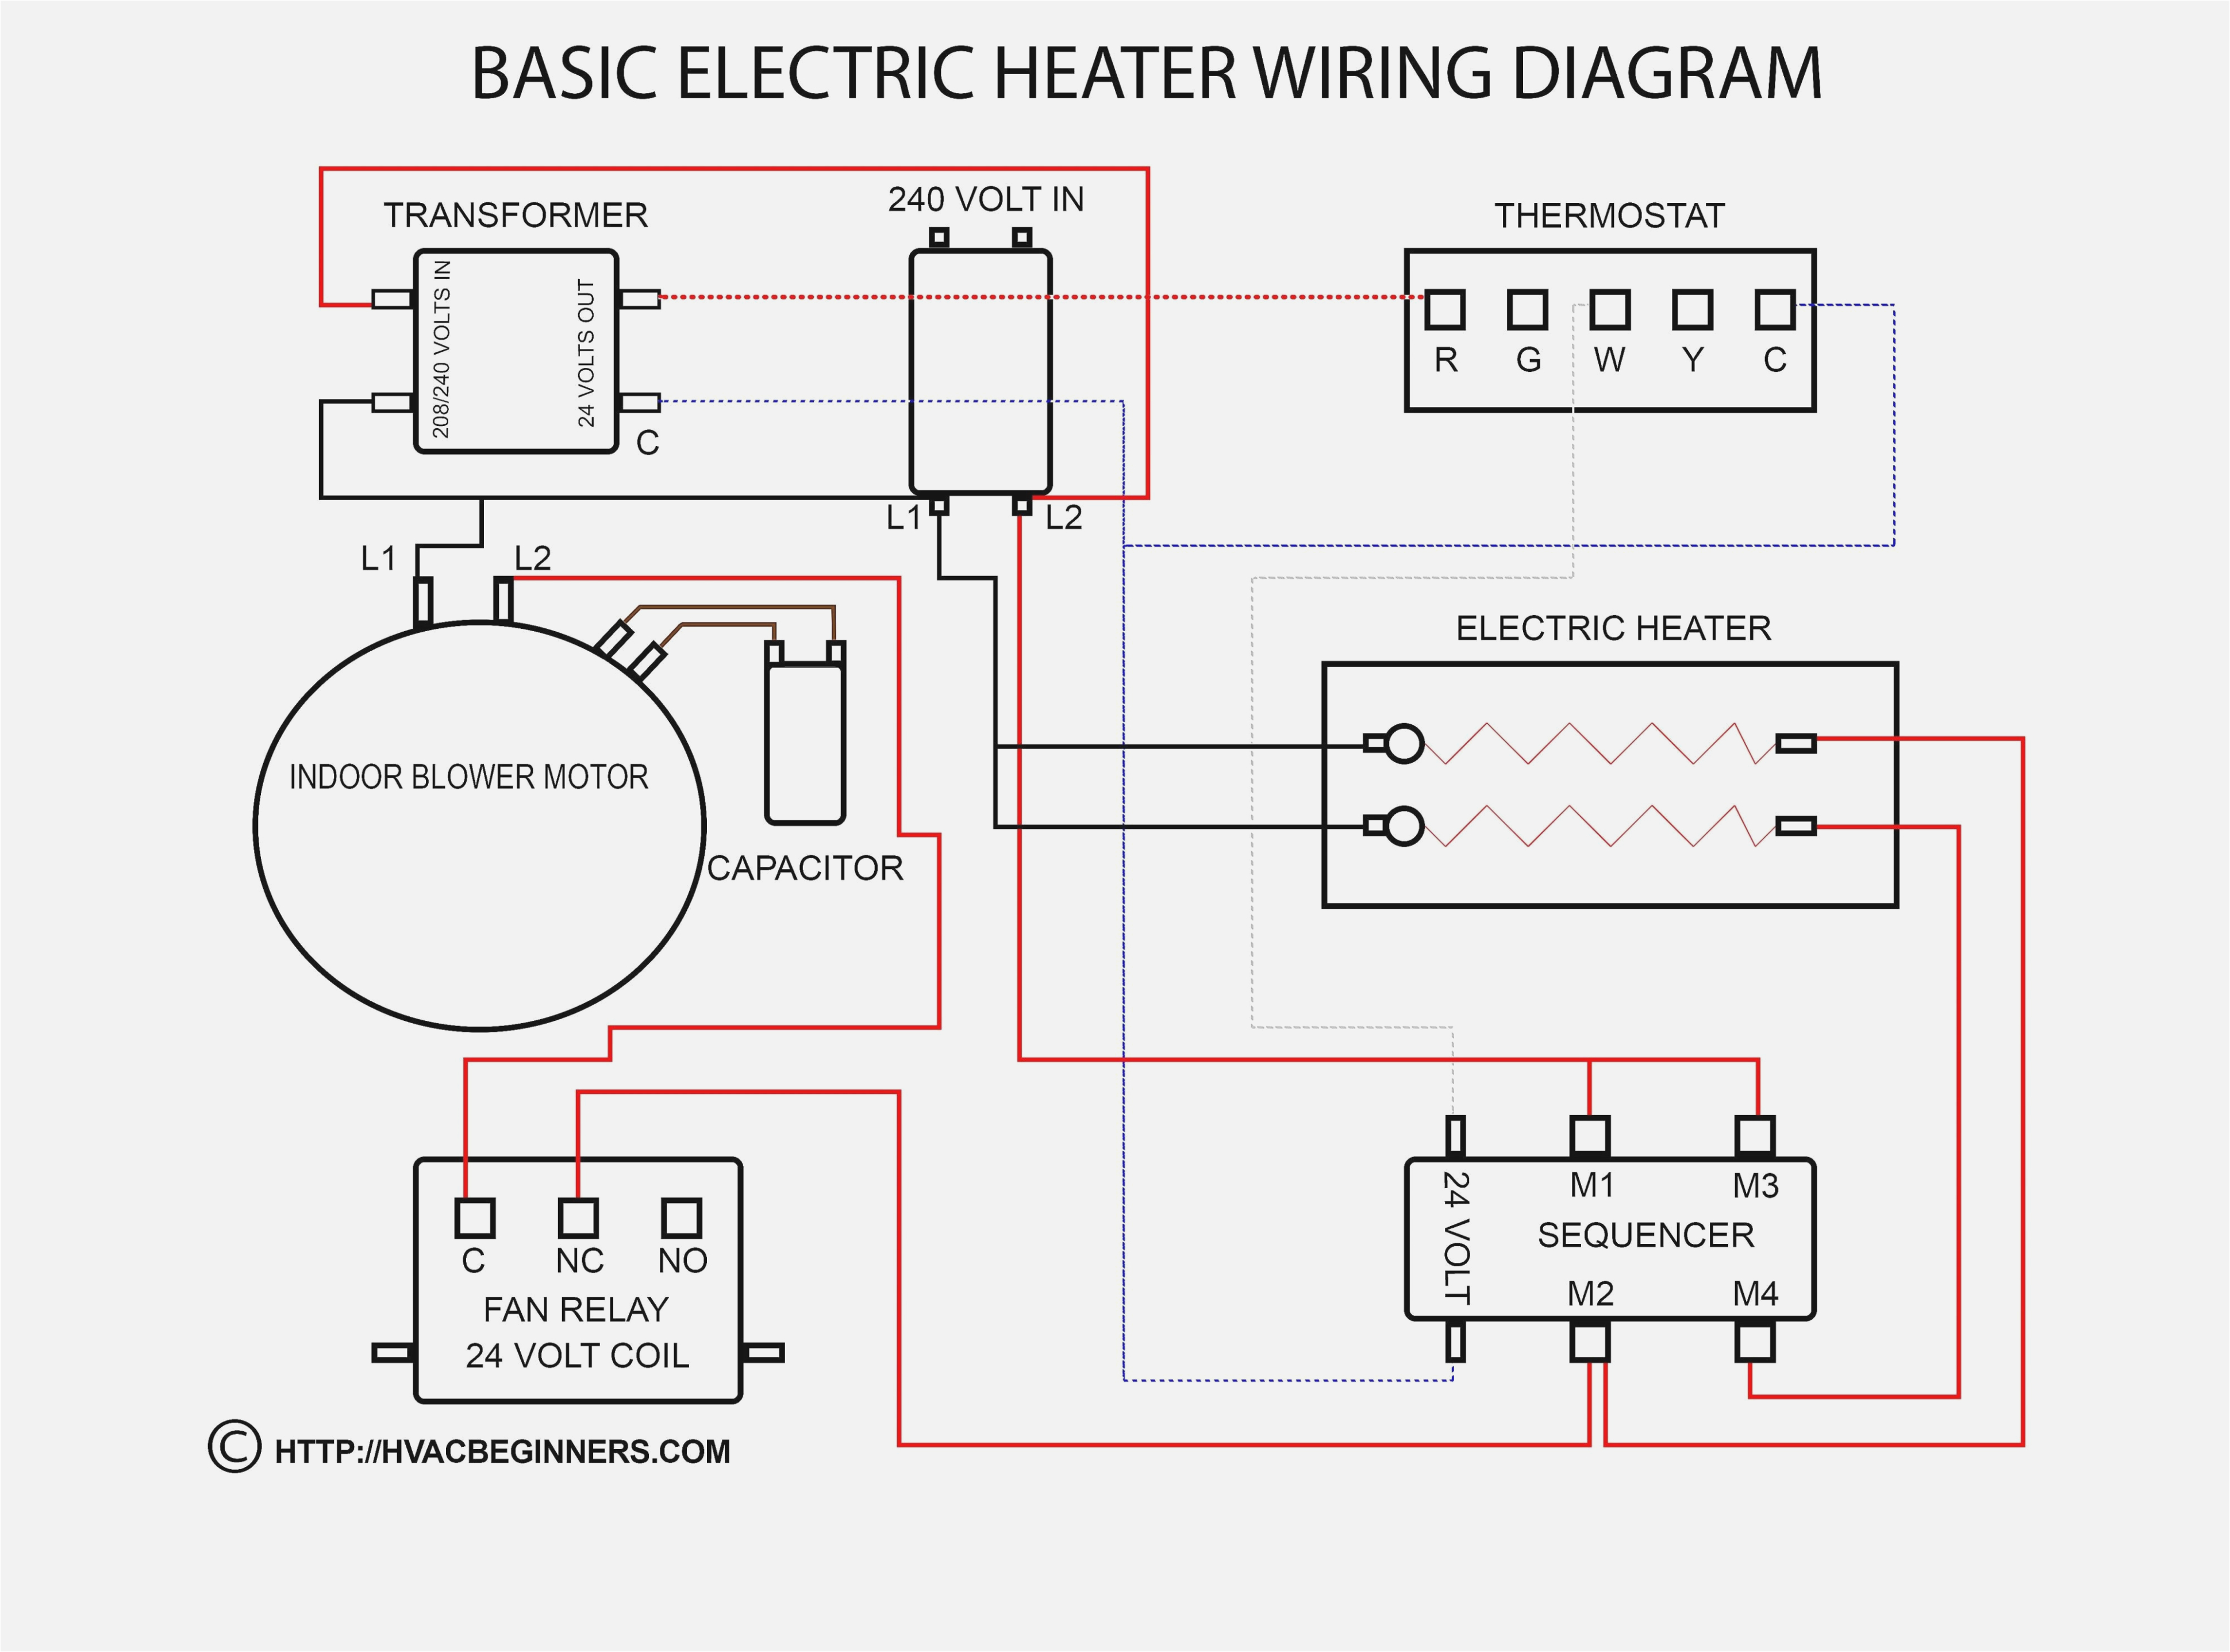 bryant gas furnace schematic diagram of wiring wiring diagrams global bryant gas heater wiring diagram